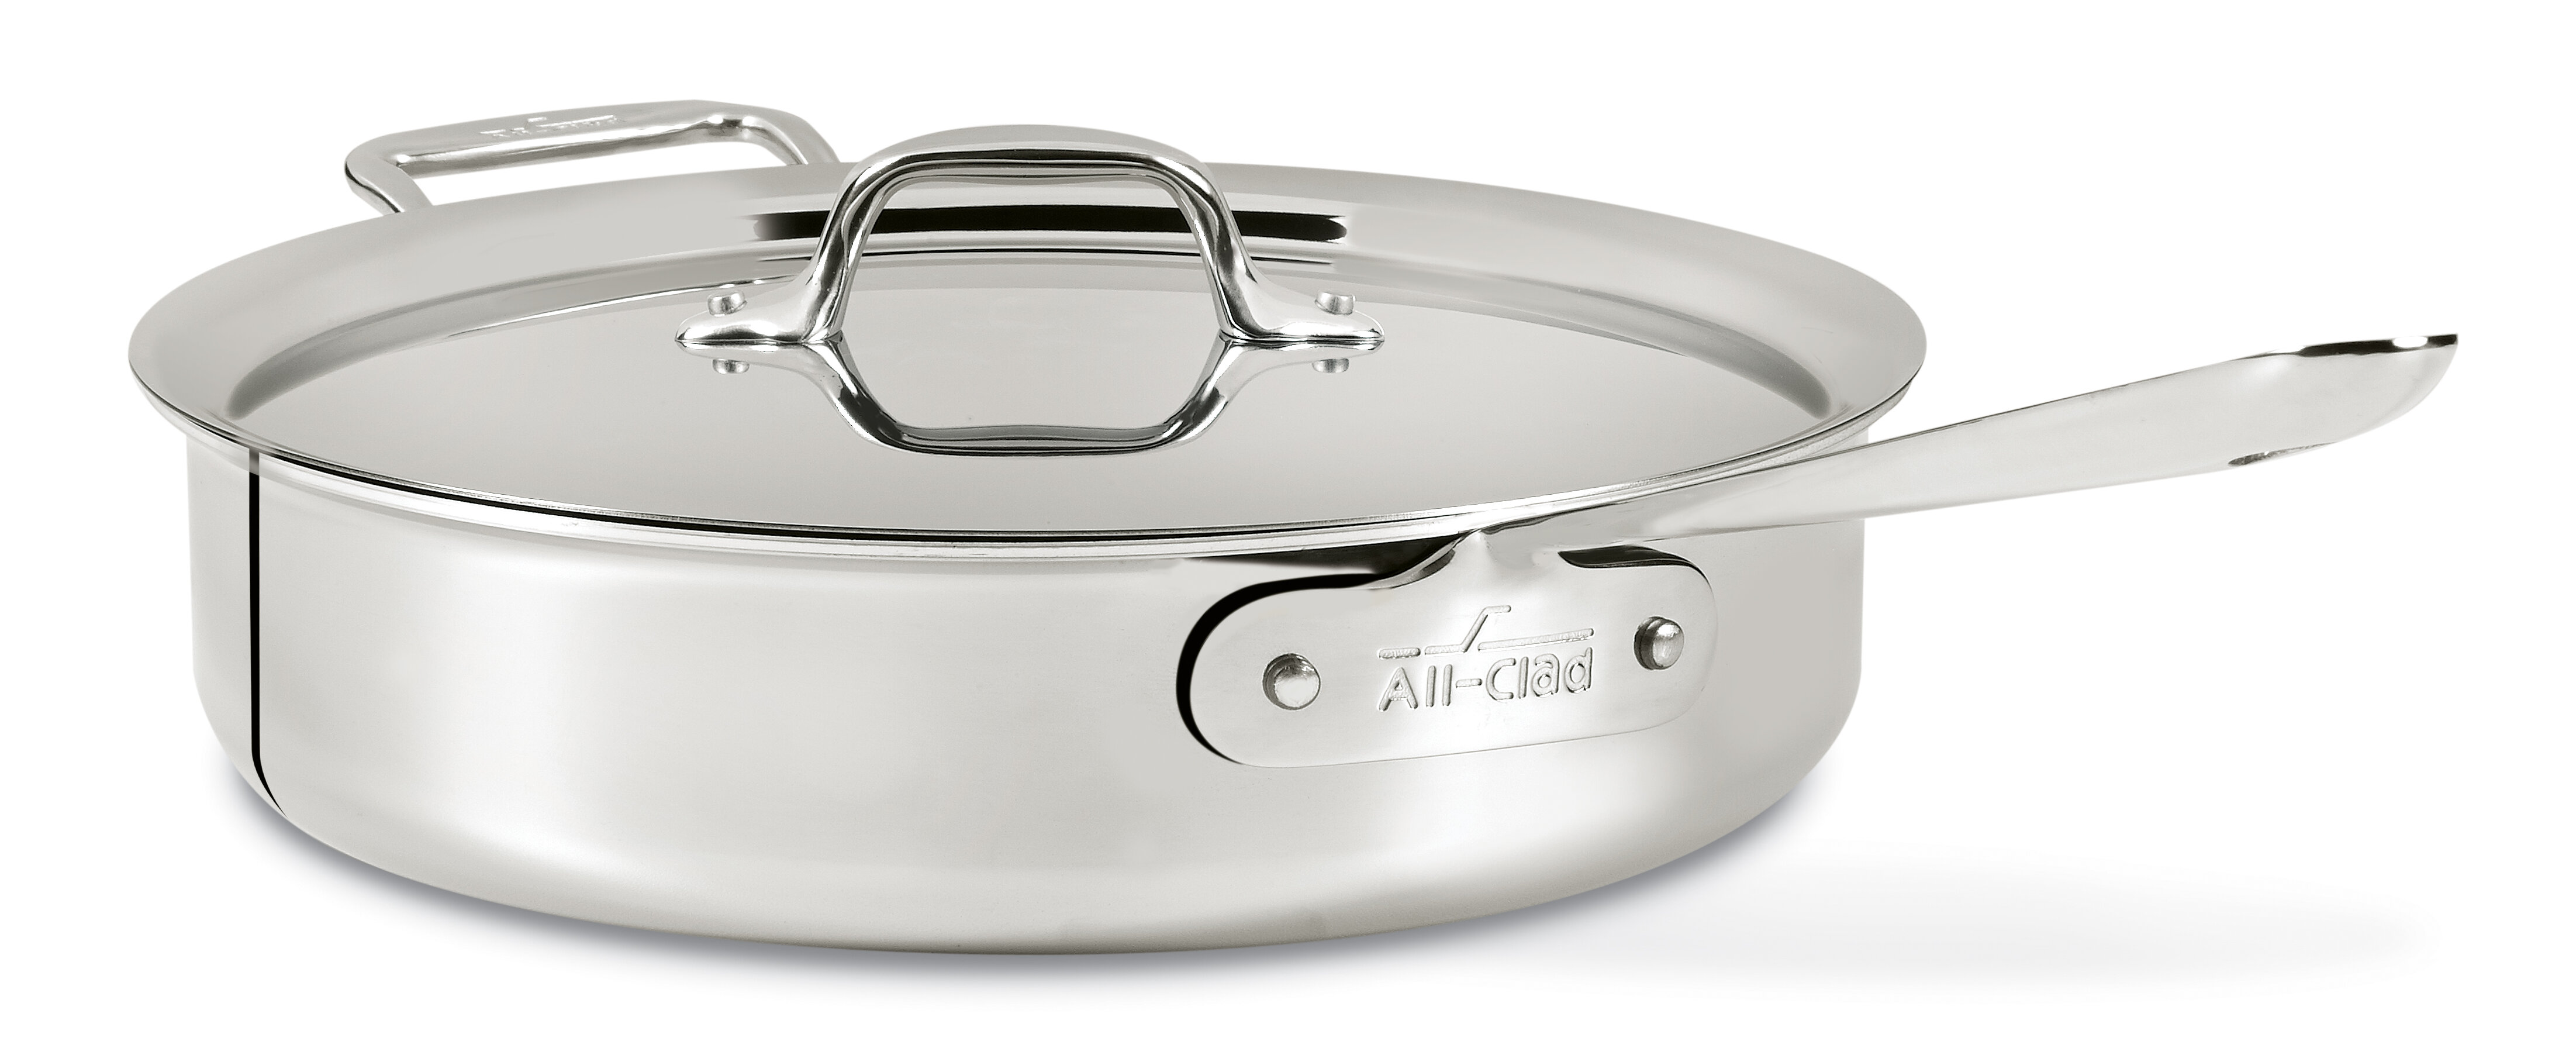 All-Clad All-Clad 7 1/4” Skillet Frying Sauté Pan Stainless Steel Induction Used 